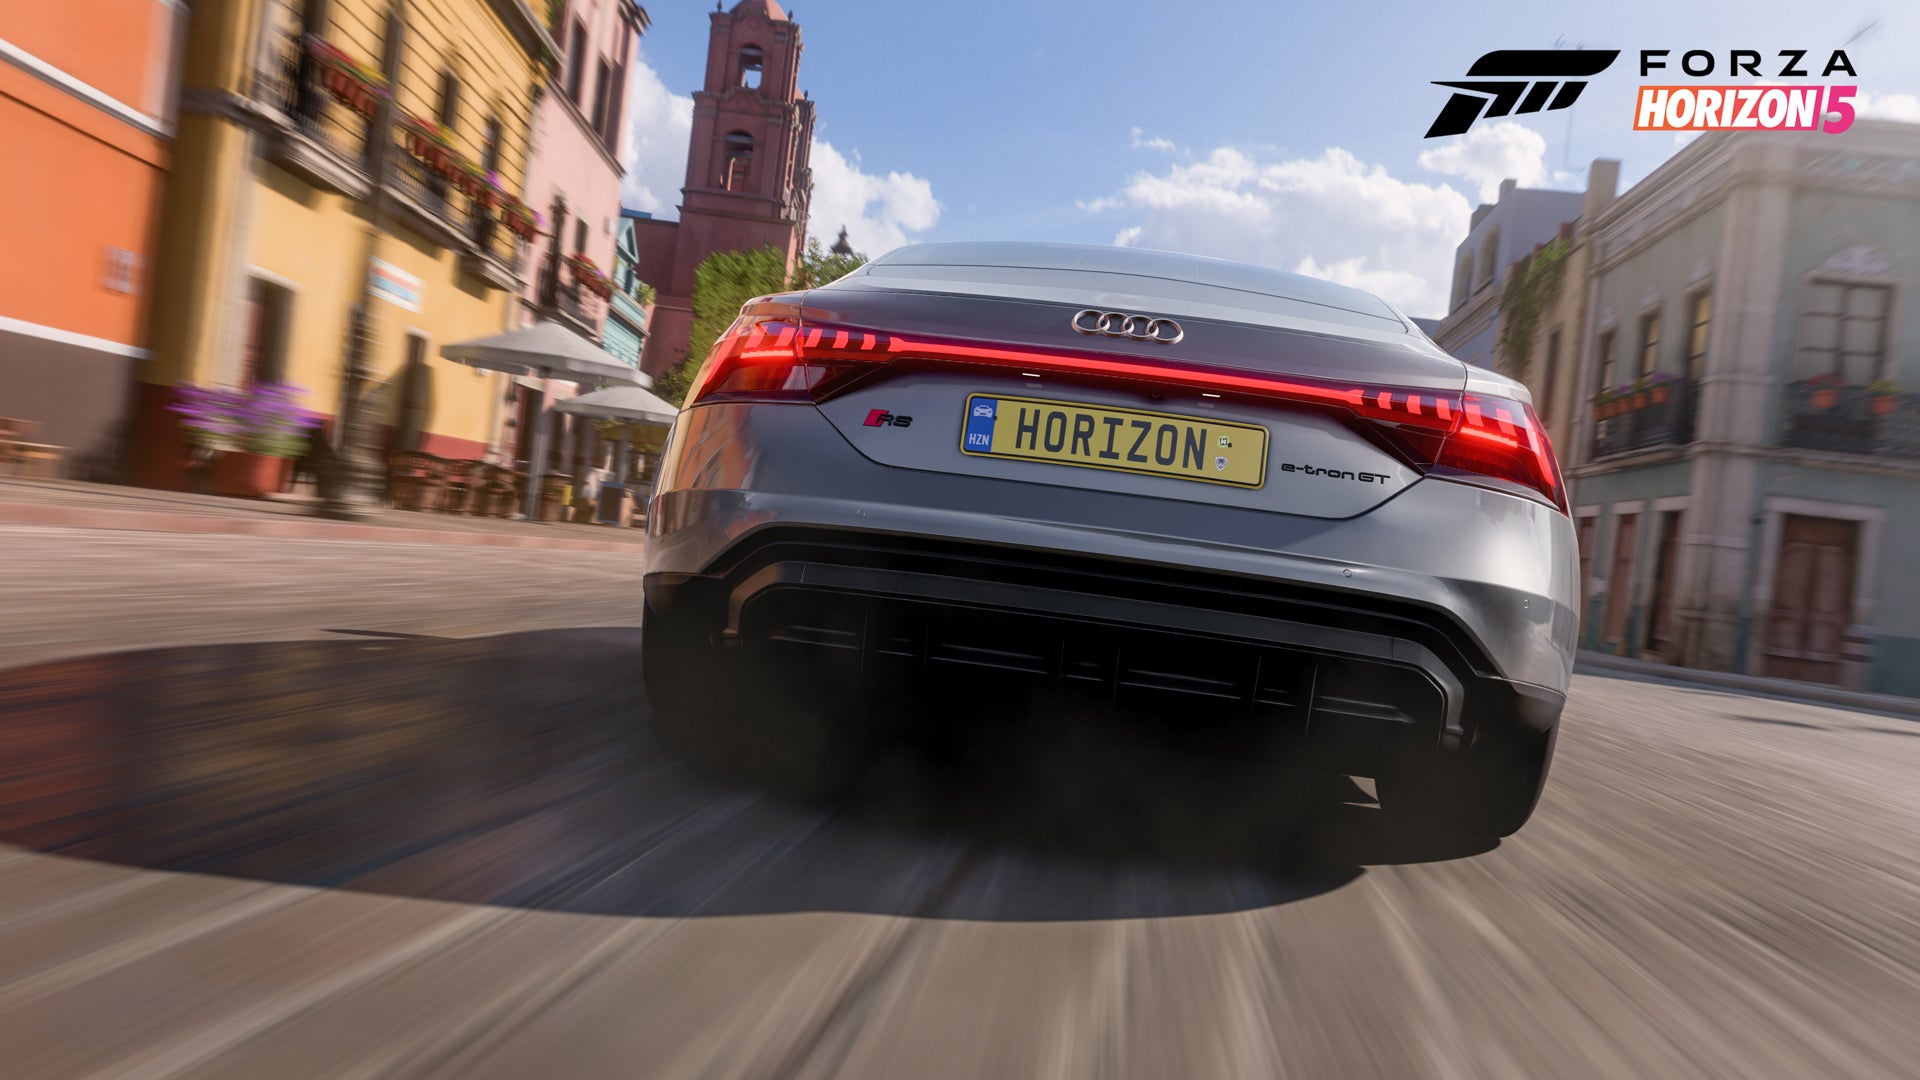 Forza Horizon 5 character customisation now includes hearing aids